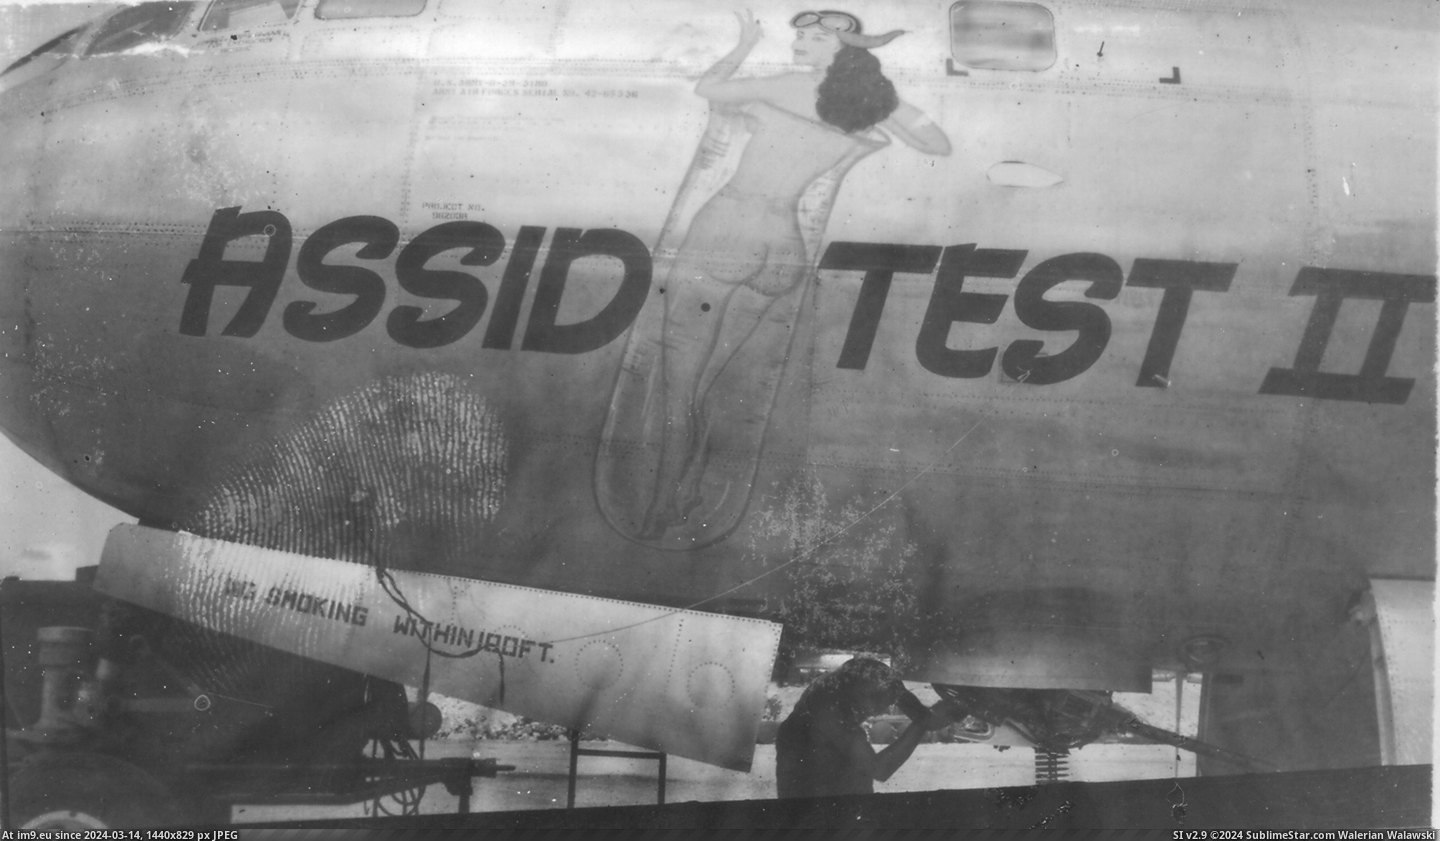 #Art #Posting #Nose #Ww2 #Galore #Guess #Grandfather [Pics] Guess I can get away with posting my Grandfather's pictures from WW2 today. Nose art galore. 6 Pic. (Изображение из альбом My r/PICS favs))